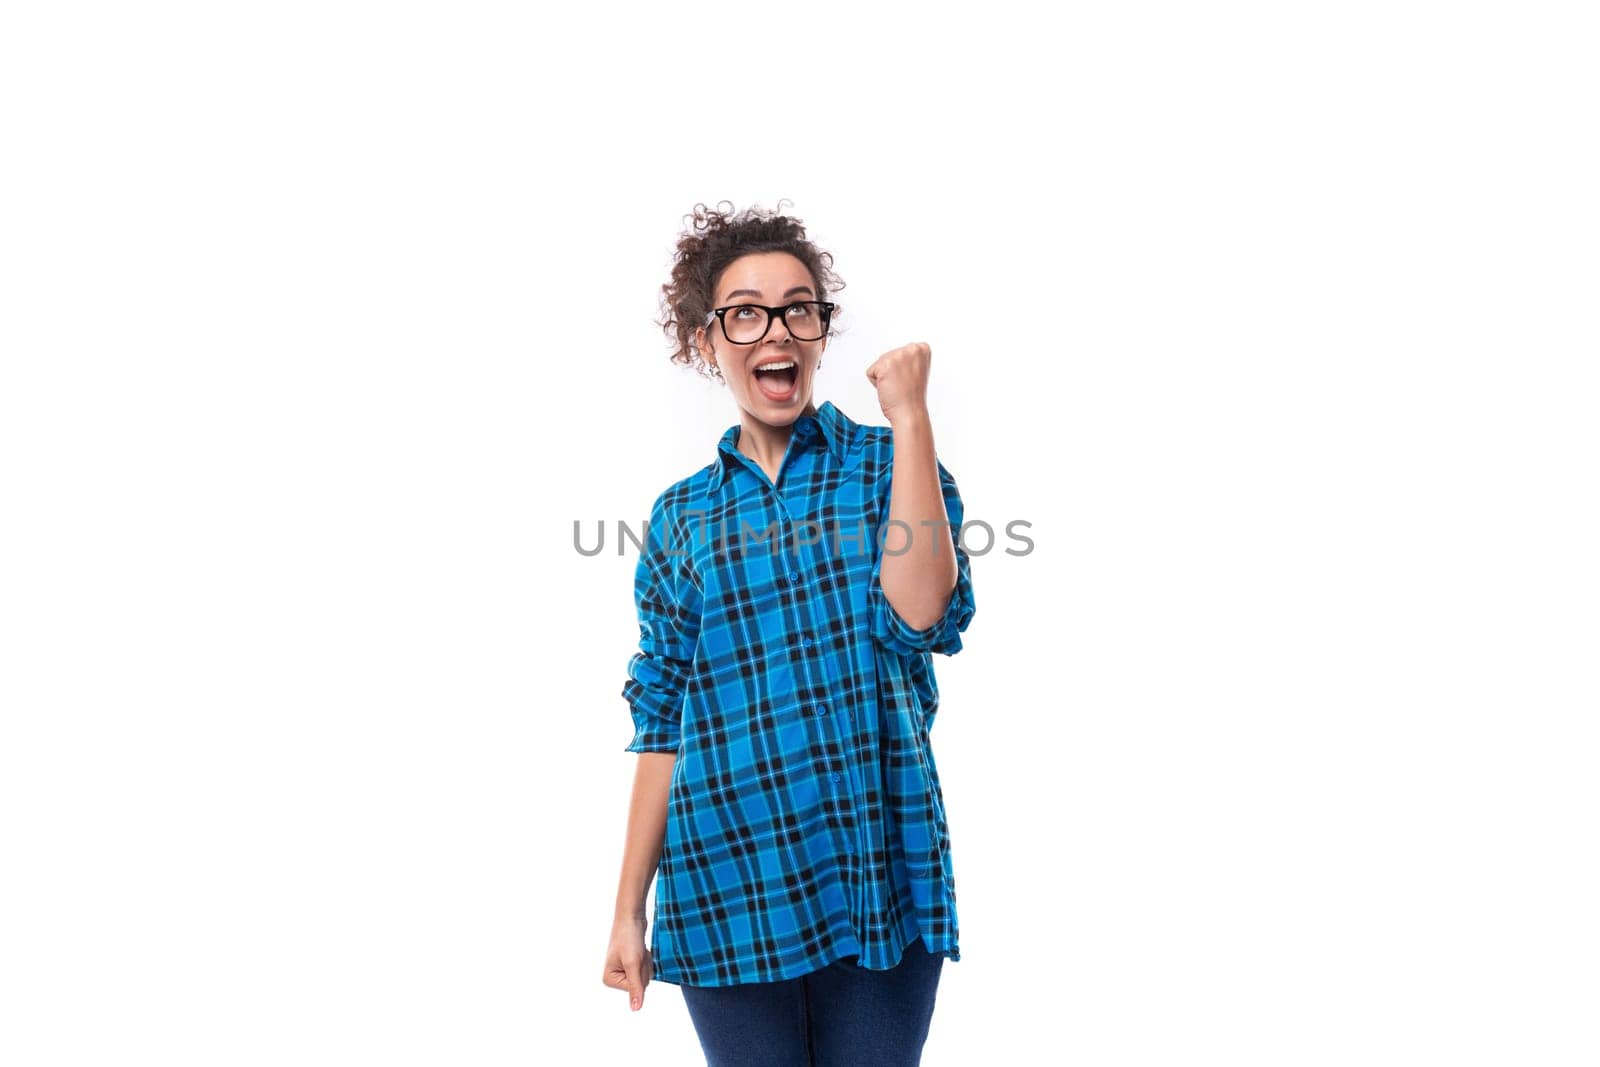 young smiling energetic curly european woman dressed casually in a blue plaid shirt on a white background.